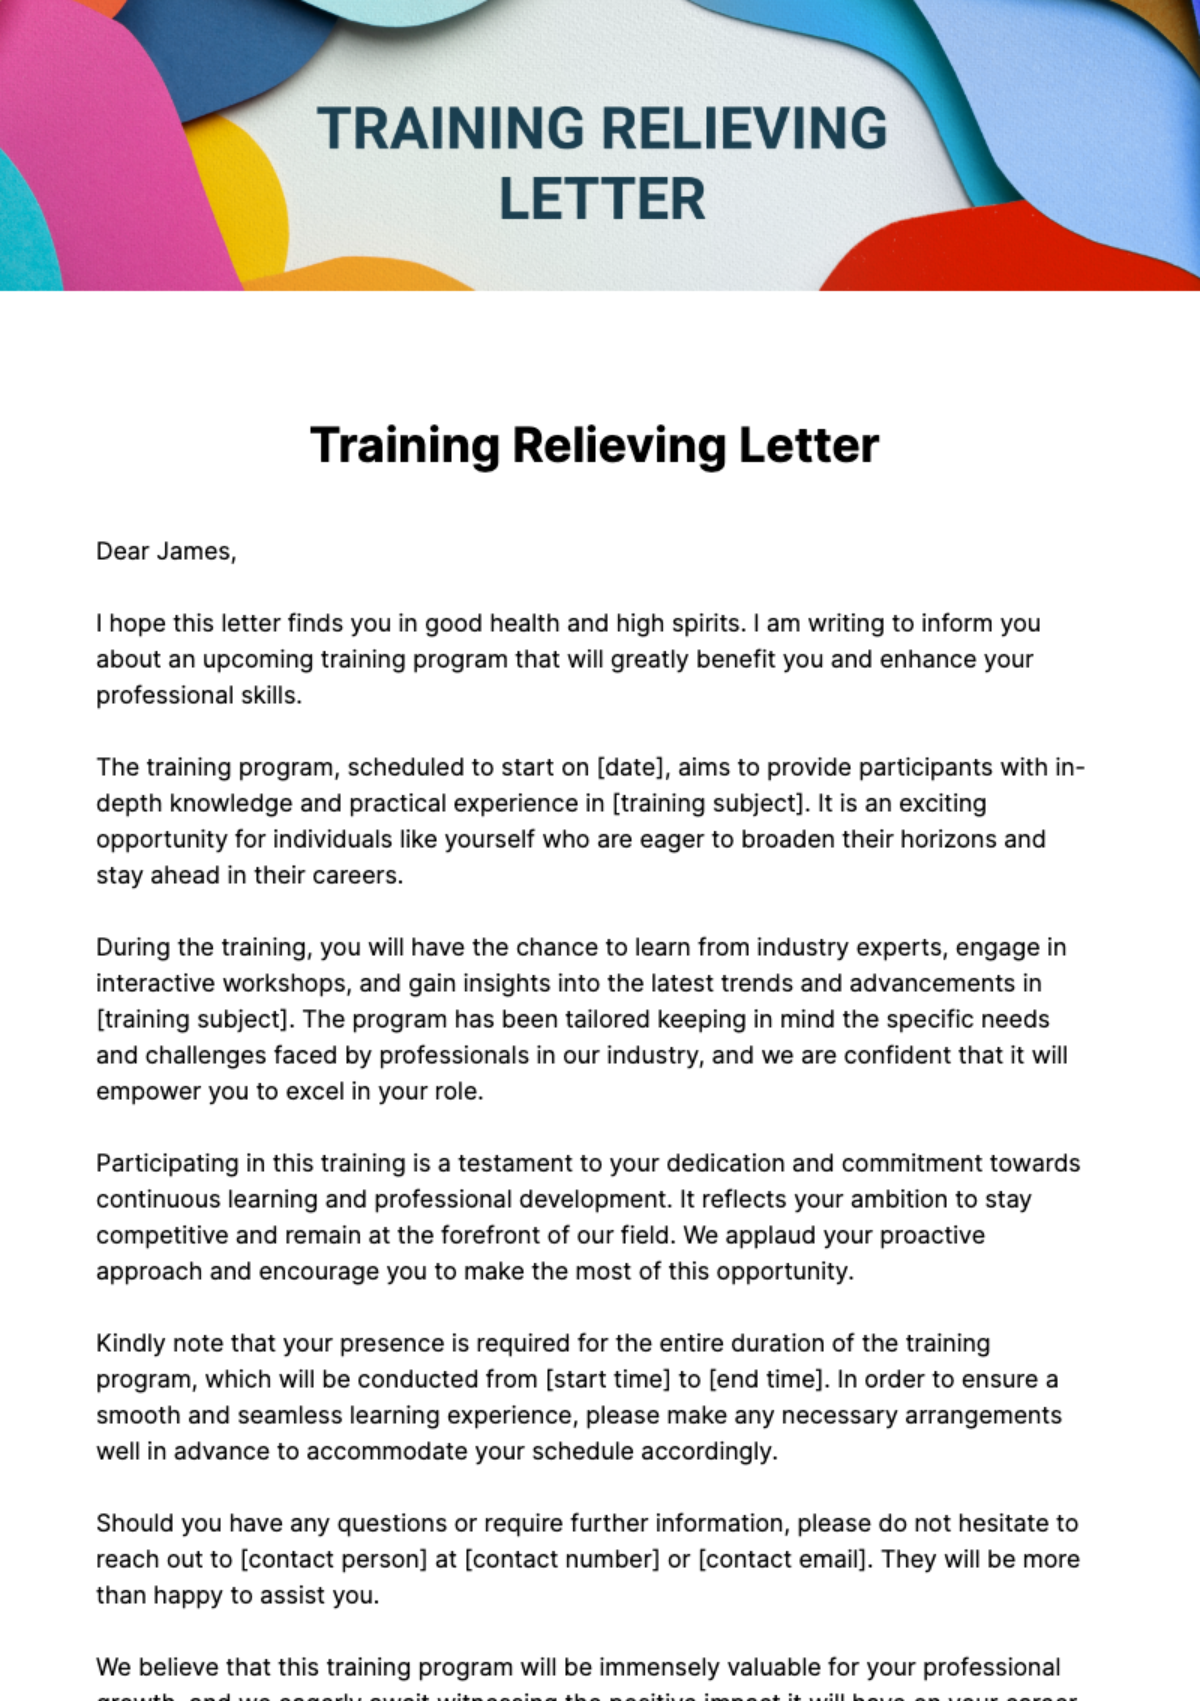 Free Training Relieving Letter Template